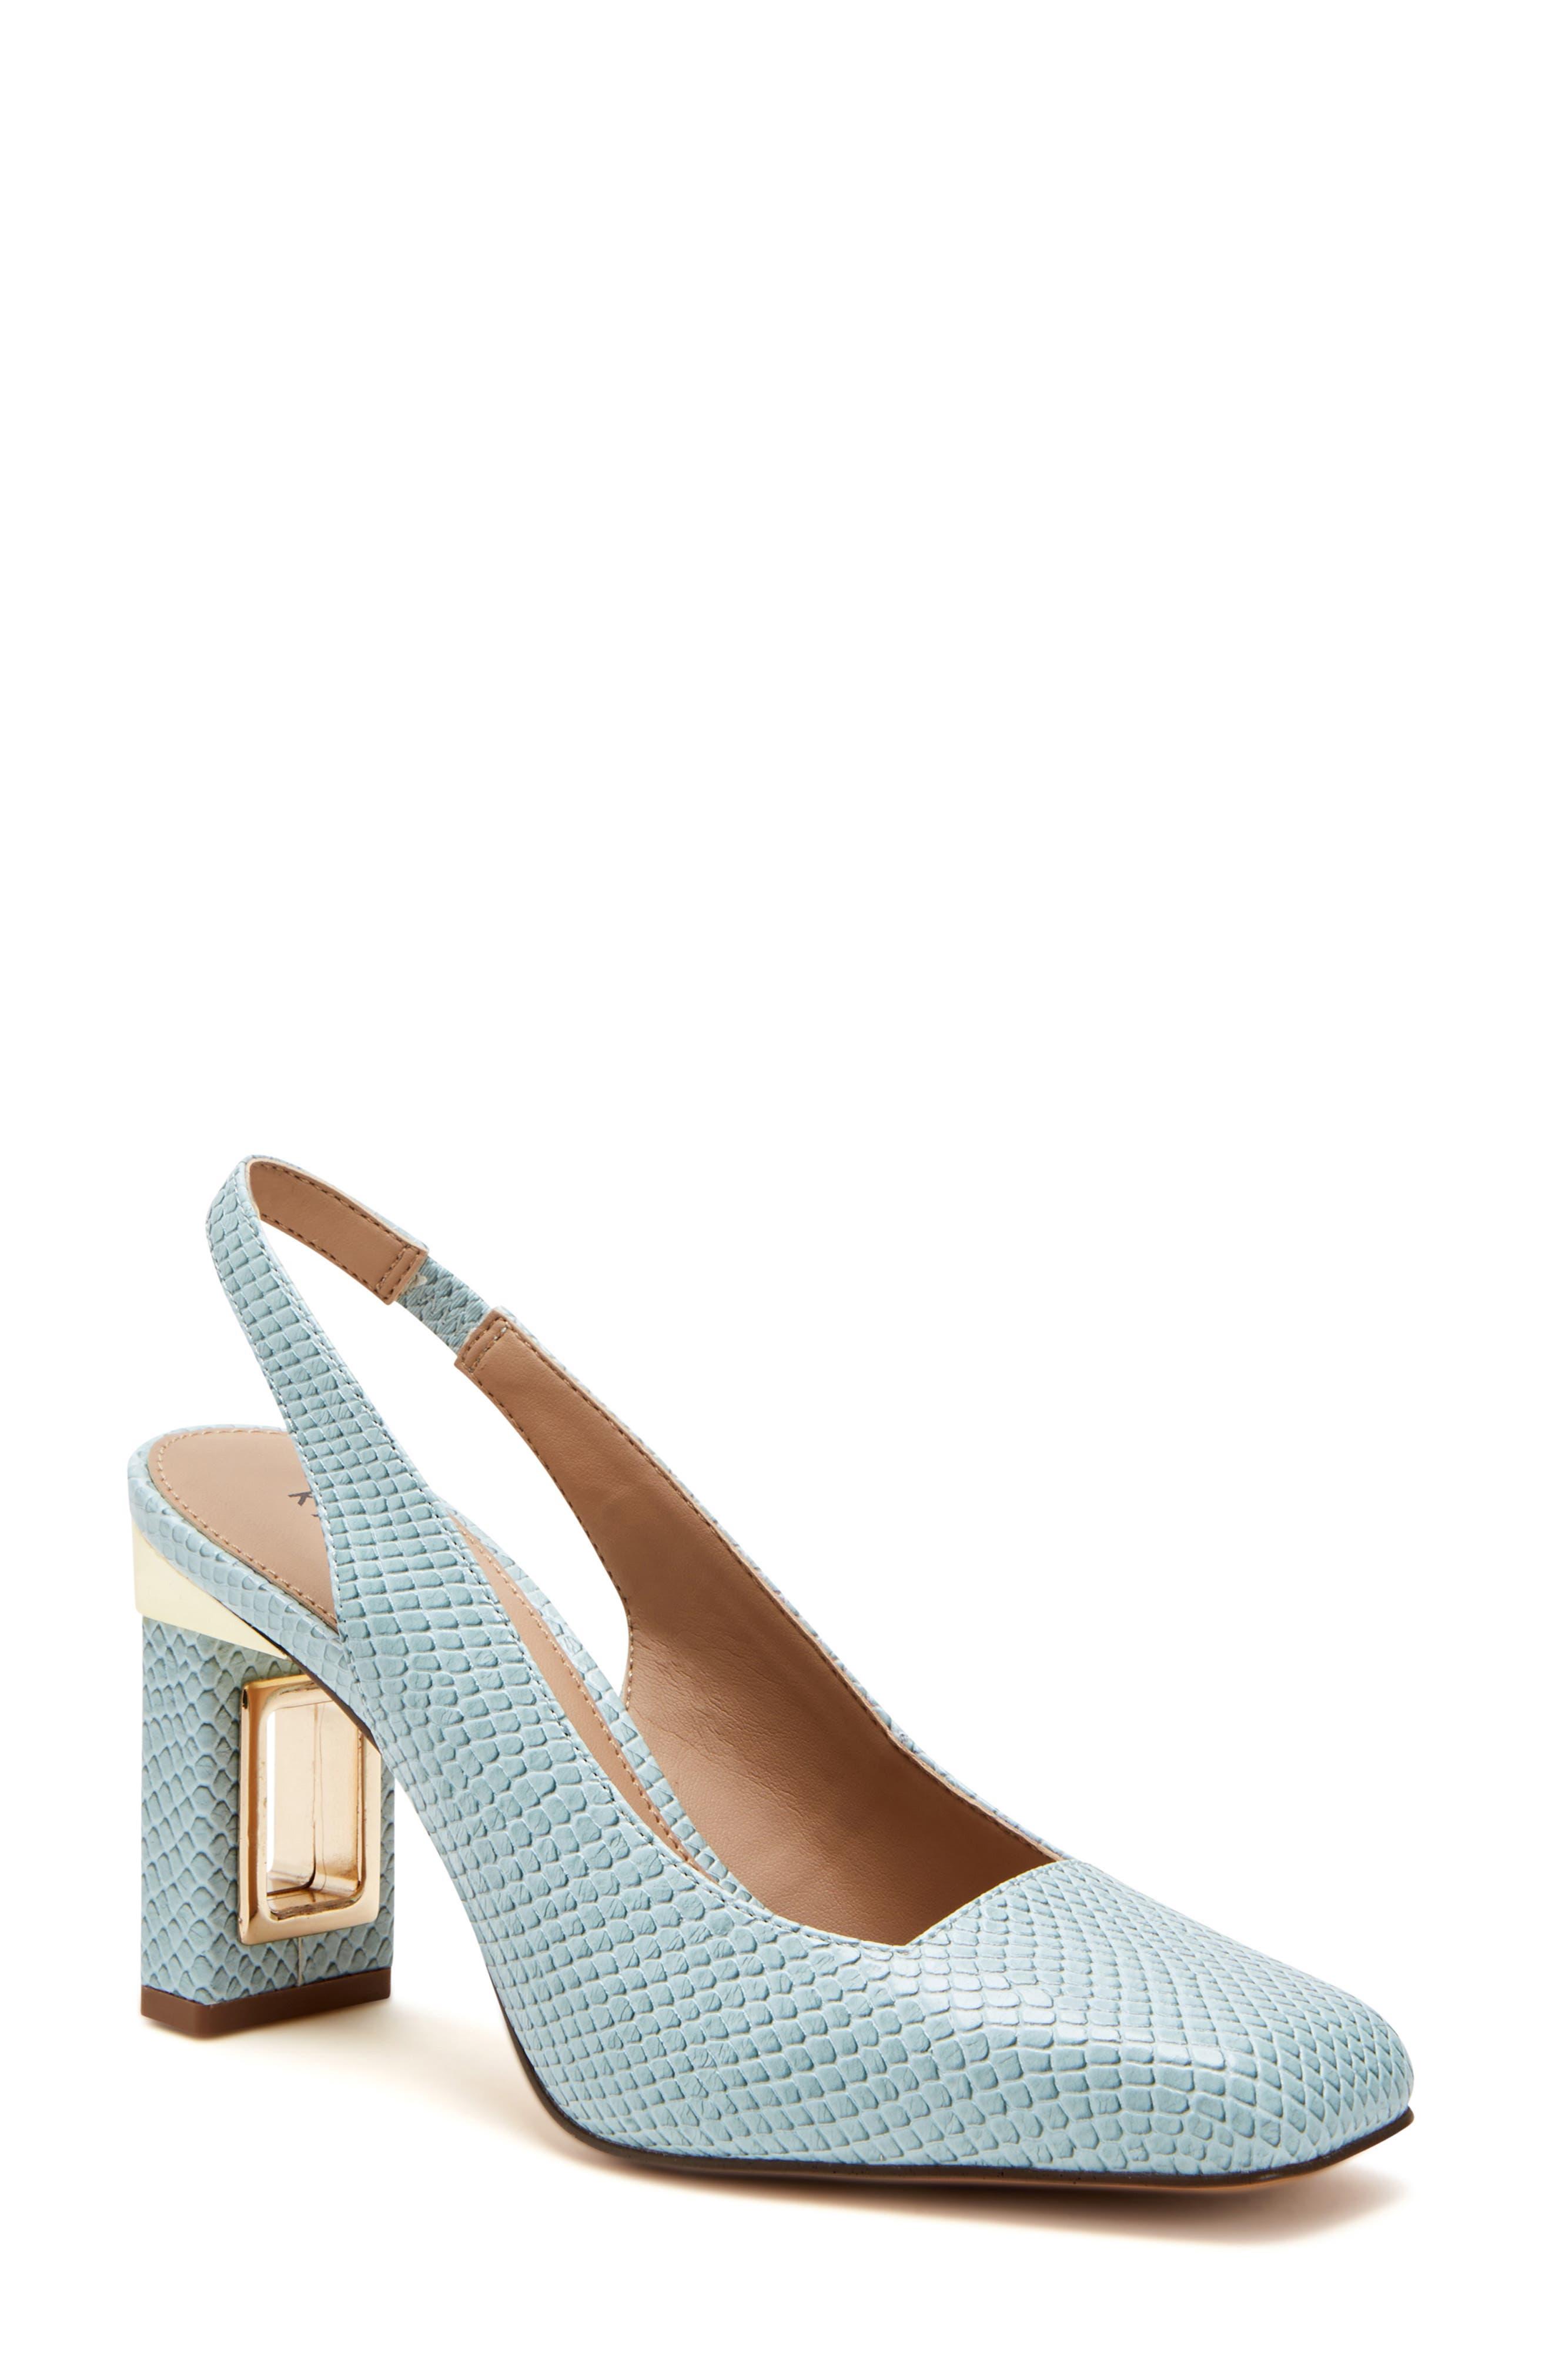 Katy Perry The Hollow Heel Slingback Pump in Blue | Lyst